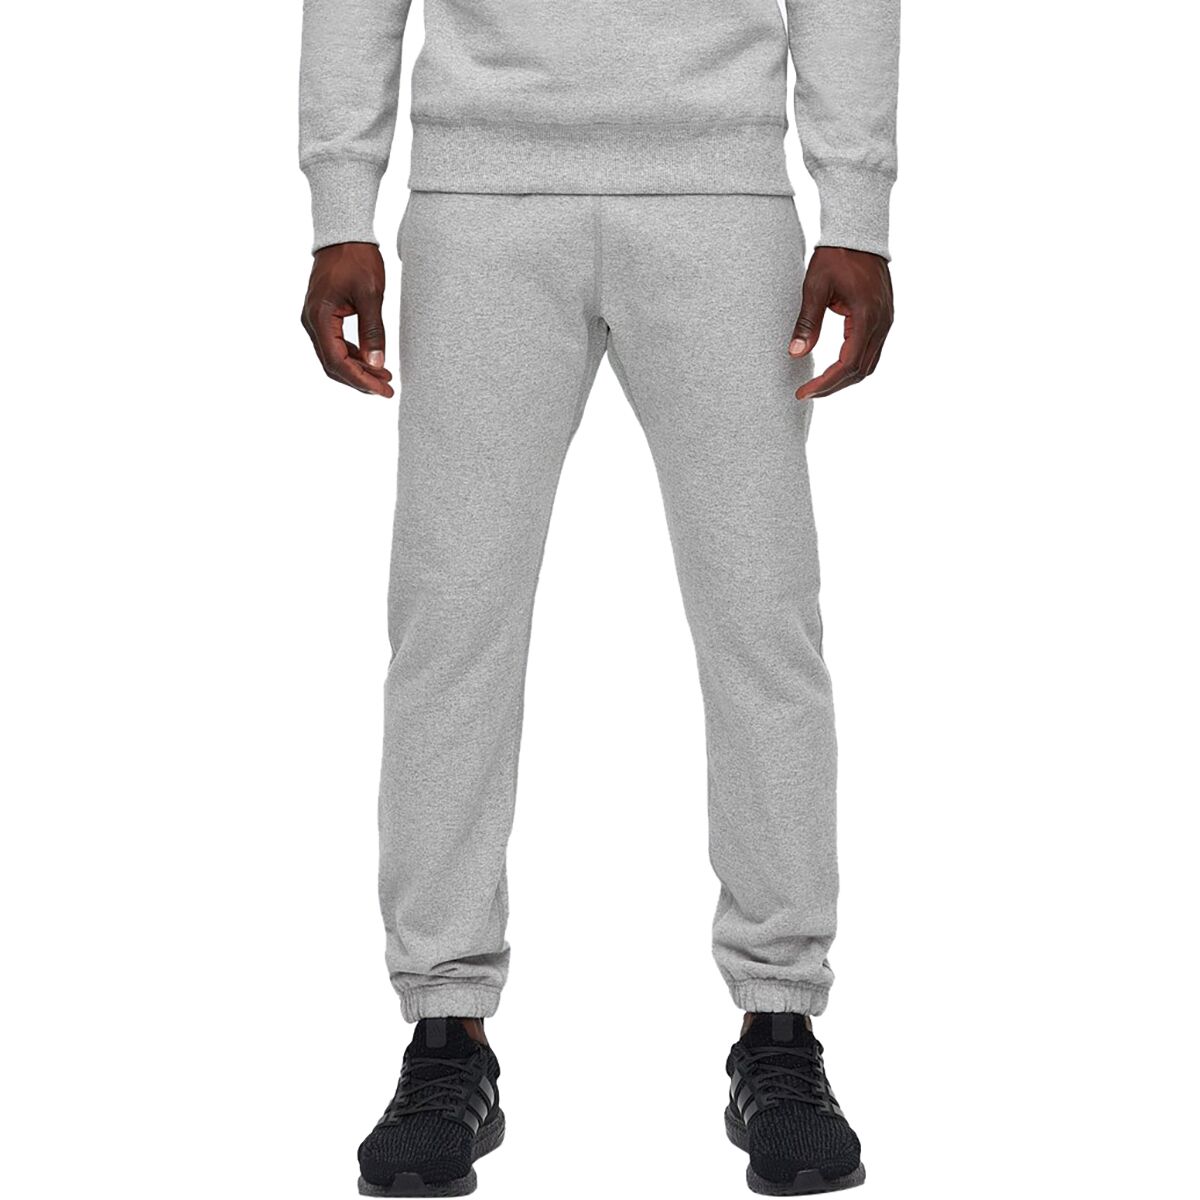 Reigning Champ Midweight Cuffed Sweatpant - Men's